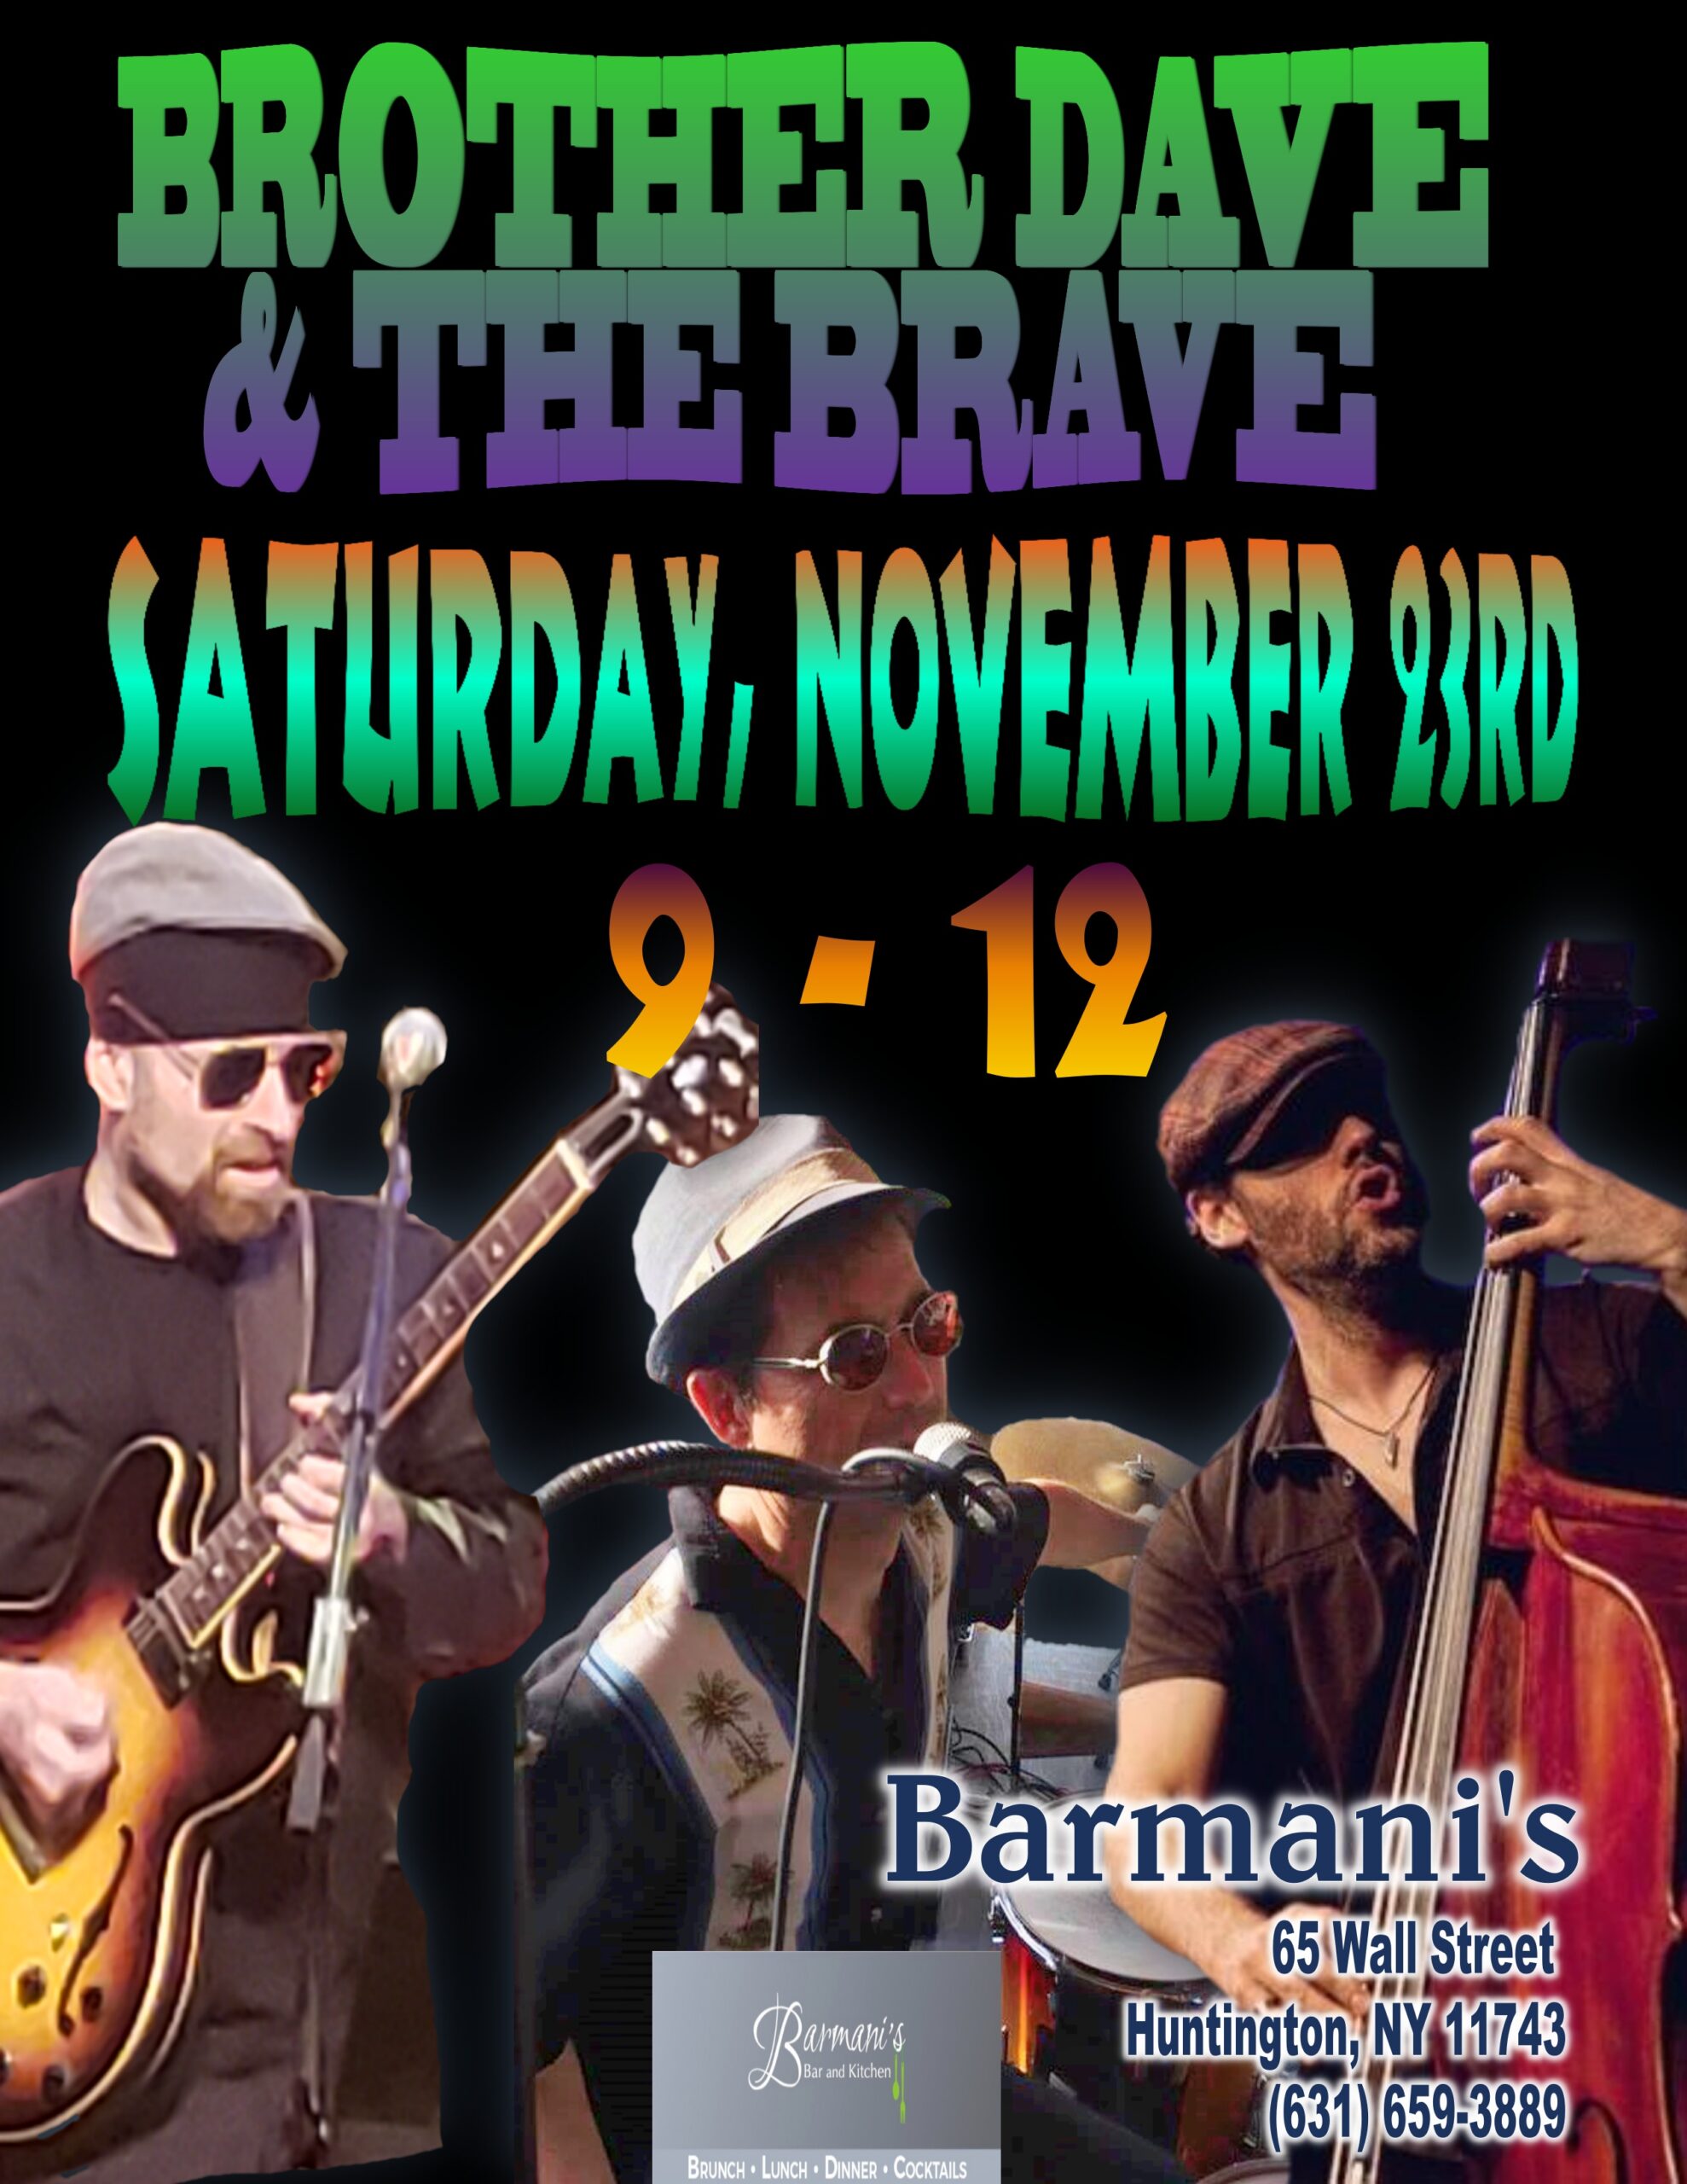 Promotional Poster for Brother Dave & The Brave